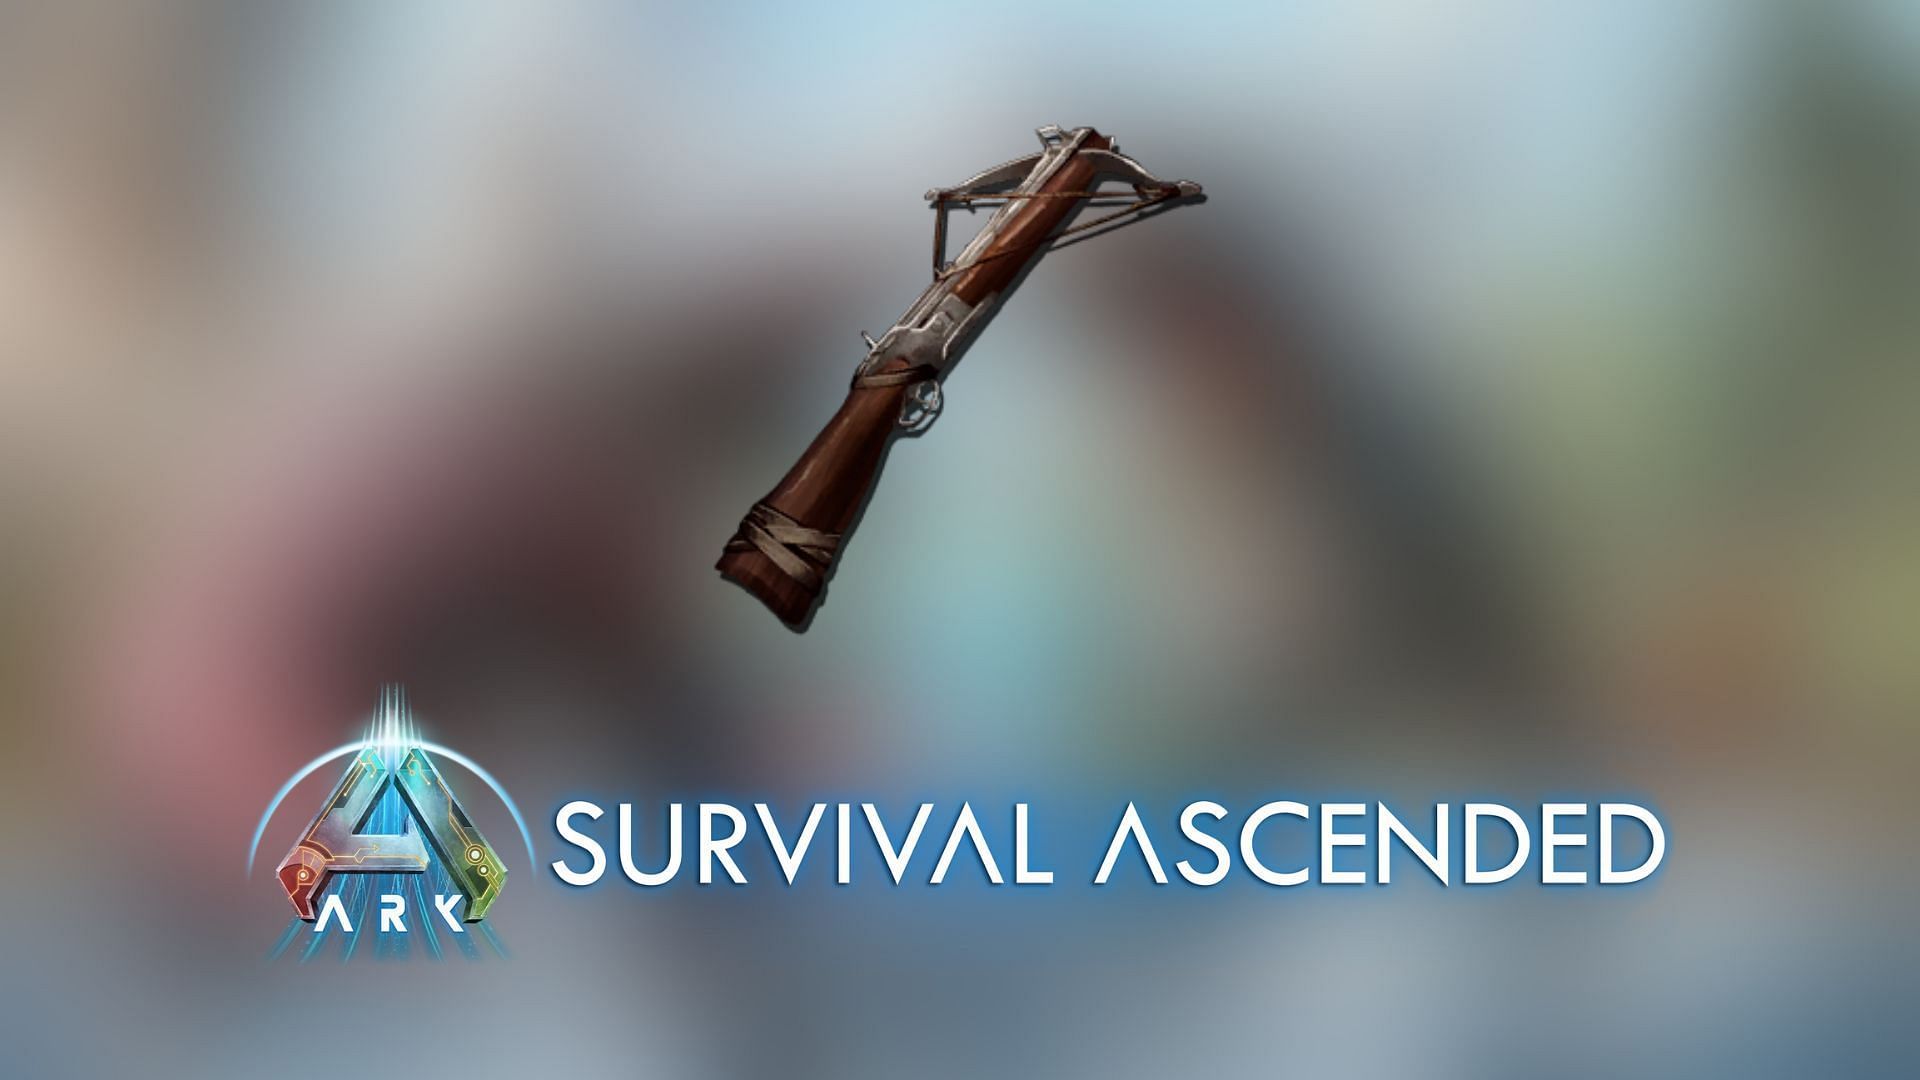 Crossbow is one of the strongest ranged weapons in Ark Survival Ascended (Image via Studio Wildcard)